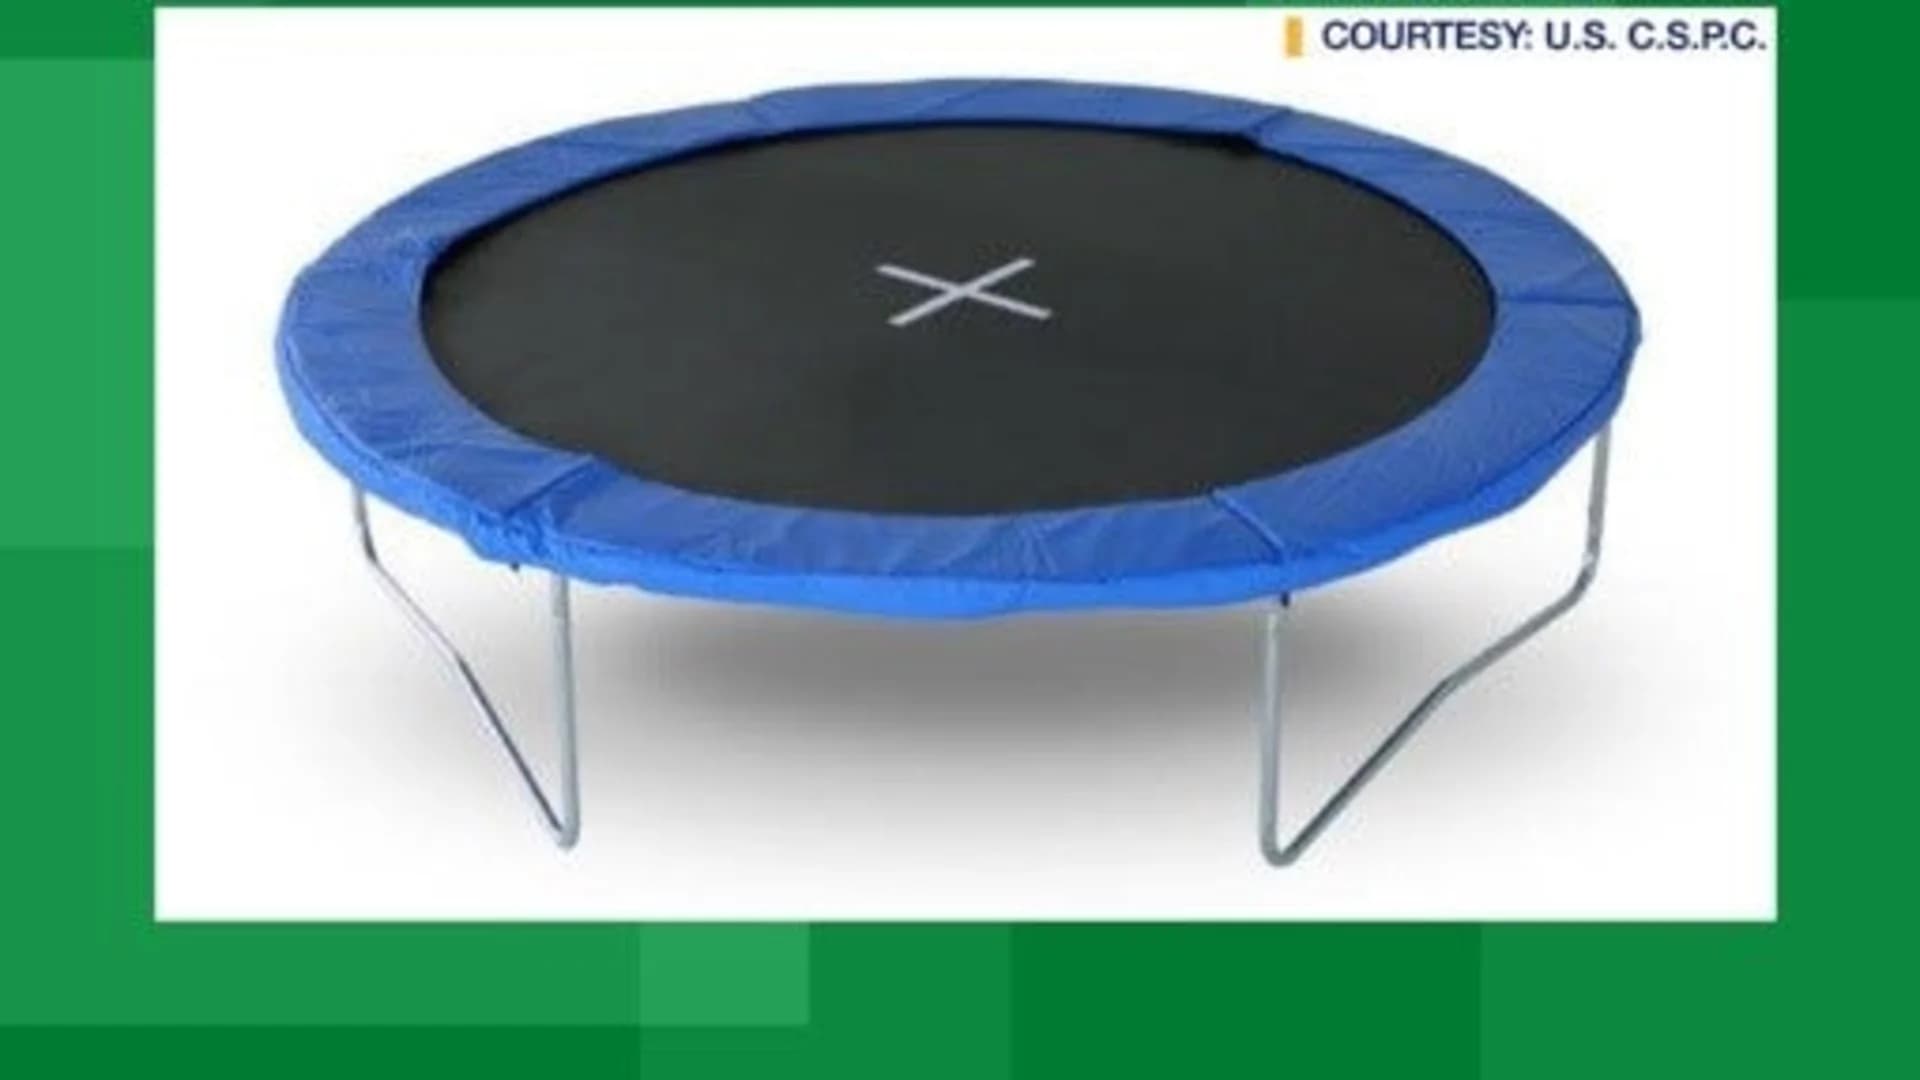 23,000 trampolines recalled after reports of metal legs breaking